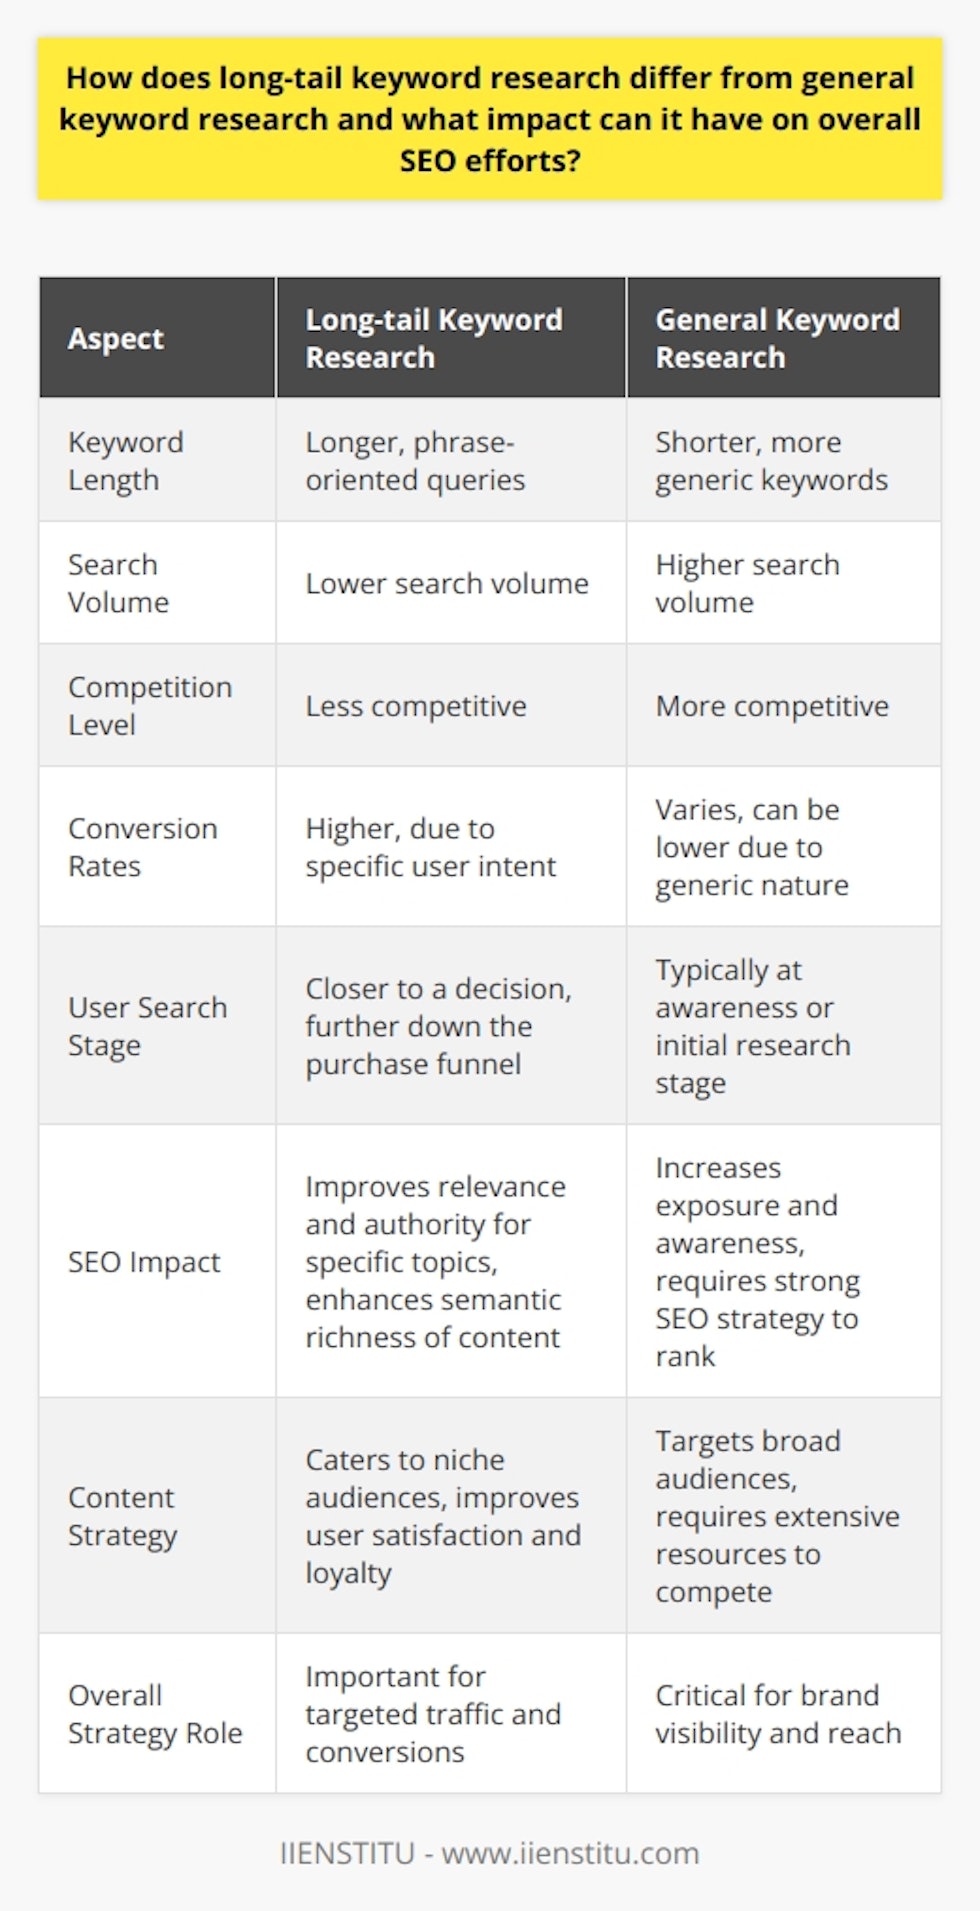 Long-tail keyword research and general keyword research represent two fundamental tactics in search engine optimization (SEO) targeting different aspects of search behavior. Understanding the nuances between them is crucial for any SEO strategy.**Long-tail Keyword Research: A Deeper Dive into Niche Markets**Long-tail keyword research is aimed at pinpointing less common, often more phrase-oriented queries with a clear intent. These keywords are usually longer, reflecting specific interests or issues users are looking to resolve. The beauty of long-tail keywords lies in their specificity; they have less search volume but attract more qualified traffic. Their conversion rates are generally higher because users who search using long-tail keywords are often further down the purchase funnel, closer to taking action.Since long-tail phrases are less competitive, they provide an opening for websites to establish a foothold in rankings relatively quickly and with more ease. They also offer the opportunity to cater content to a niche audience, delivering exactly what they are searching for, which can significantly improve user satisfaction and loyalty.**The Impact of Long-tail Keywords on SEO Efforts**Incorporating long-tail keywords into SEO efforts can vastly improve a site's relevance for specific topics, thereby enhancing its authority in the eyes of search engines. This is especially important for websites that struggle to compete with industry giants for general, high-competition keywords.Using long-tail keywords can also enhance the semantic richness of the content, which is a key factor in the way modern search engines understand and rank websites. They enable content creators to diversify their keyword portfolio, thus potentially gaining traction across a wider range of search queries.**Differentiating from General Keyword Research**In contrast, general keyword research revolves around more common and typically shorter keywords that have a high search volume. These keywords are often more generic and therefore more competitive. Ranking for general keywords can provide significant exposure but requires a robust SEO strategy and often a higher budget and resources to achieve and maintain rankings.**The Cumulative Effect on SEO**The real magic happens when a balanced strategy combines both long-tail and general keyword research. This mix allows a website to attract both broad audiences through general keywords and highly targeted visitors through long-tail phrases. When used effectively, this combination can help a site appeal to different stages of the user's search journey, from initial awareness through to specific research and decision-making.**Conclusion: Strategic Harmony for Maximum SEO Impact**Both long-tail and general keyword research are indispensable parts of a comprehensive SEO strategy. Understanding and implementing the distinct advantages of long-tail keyword research can lead to improved rankings, better targeting, and higher conversion rates without the fierce competition of general keywords. Meanwhile, general keywords maintain their importance for awareness and reach. Together, they create a harmonious SEO strategy that can grow both the visibility and the authority of a website in the digital landscape.